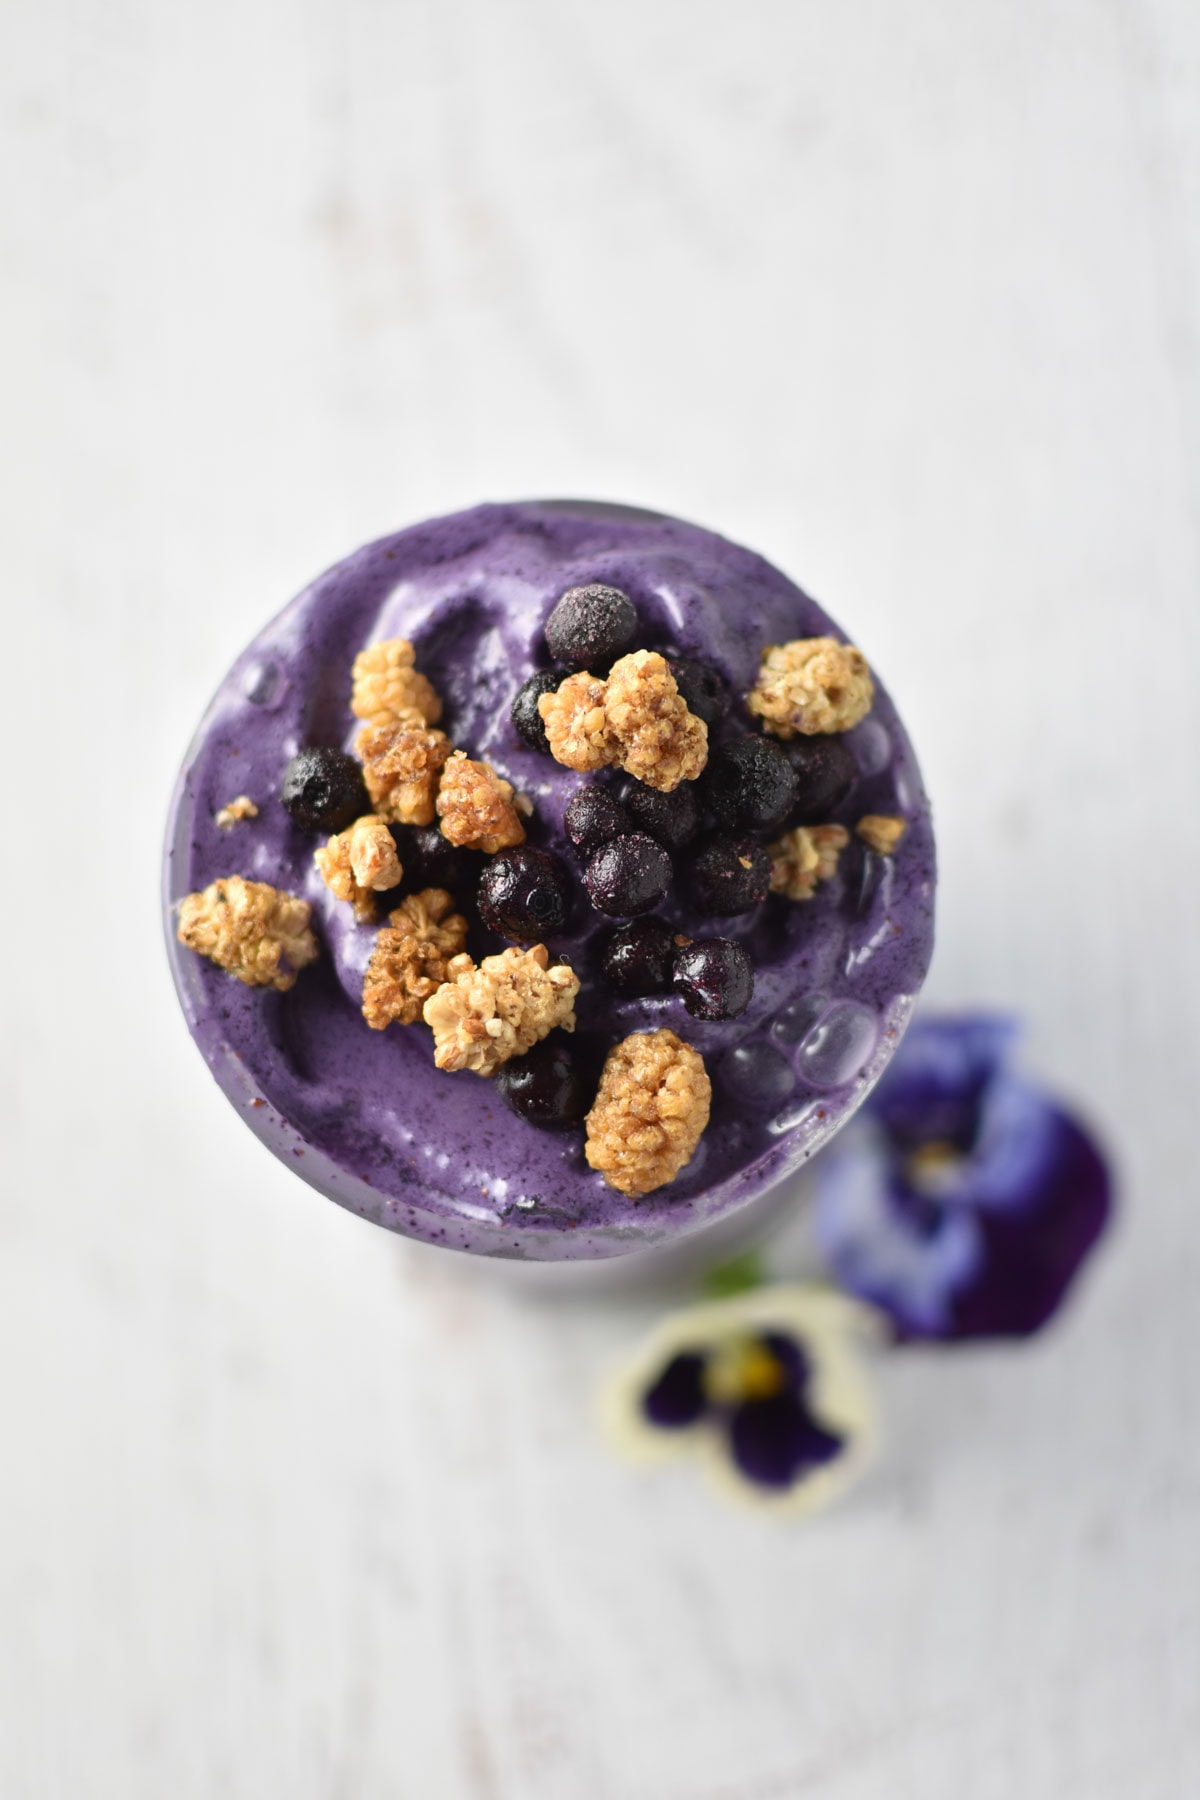 Dried mulberries and blueberries sprinkled on top of a blueberry smoothie.